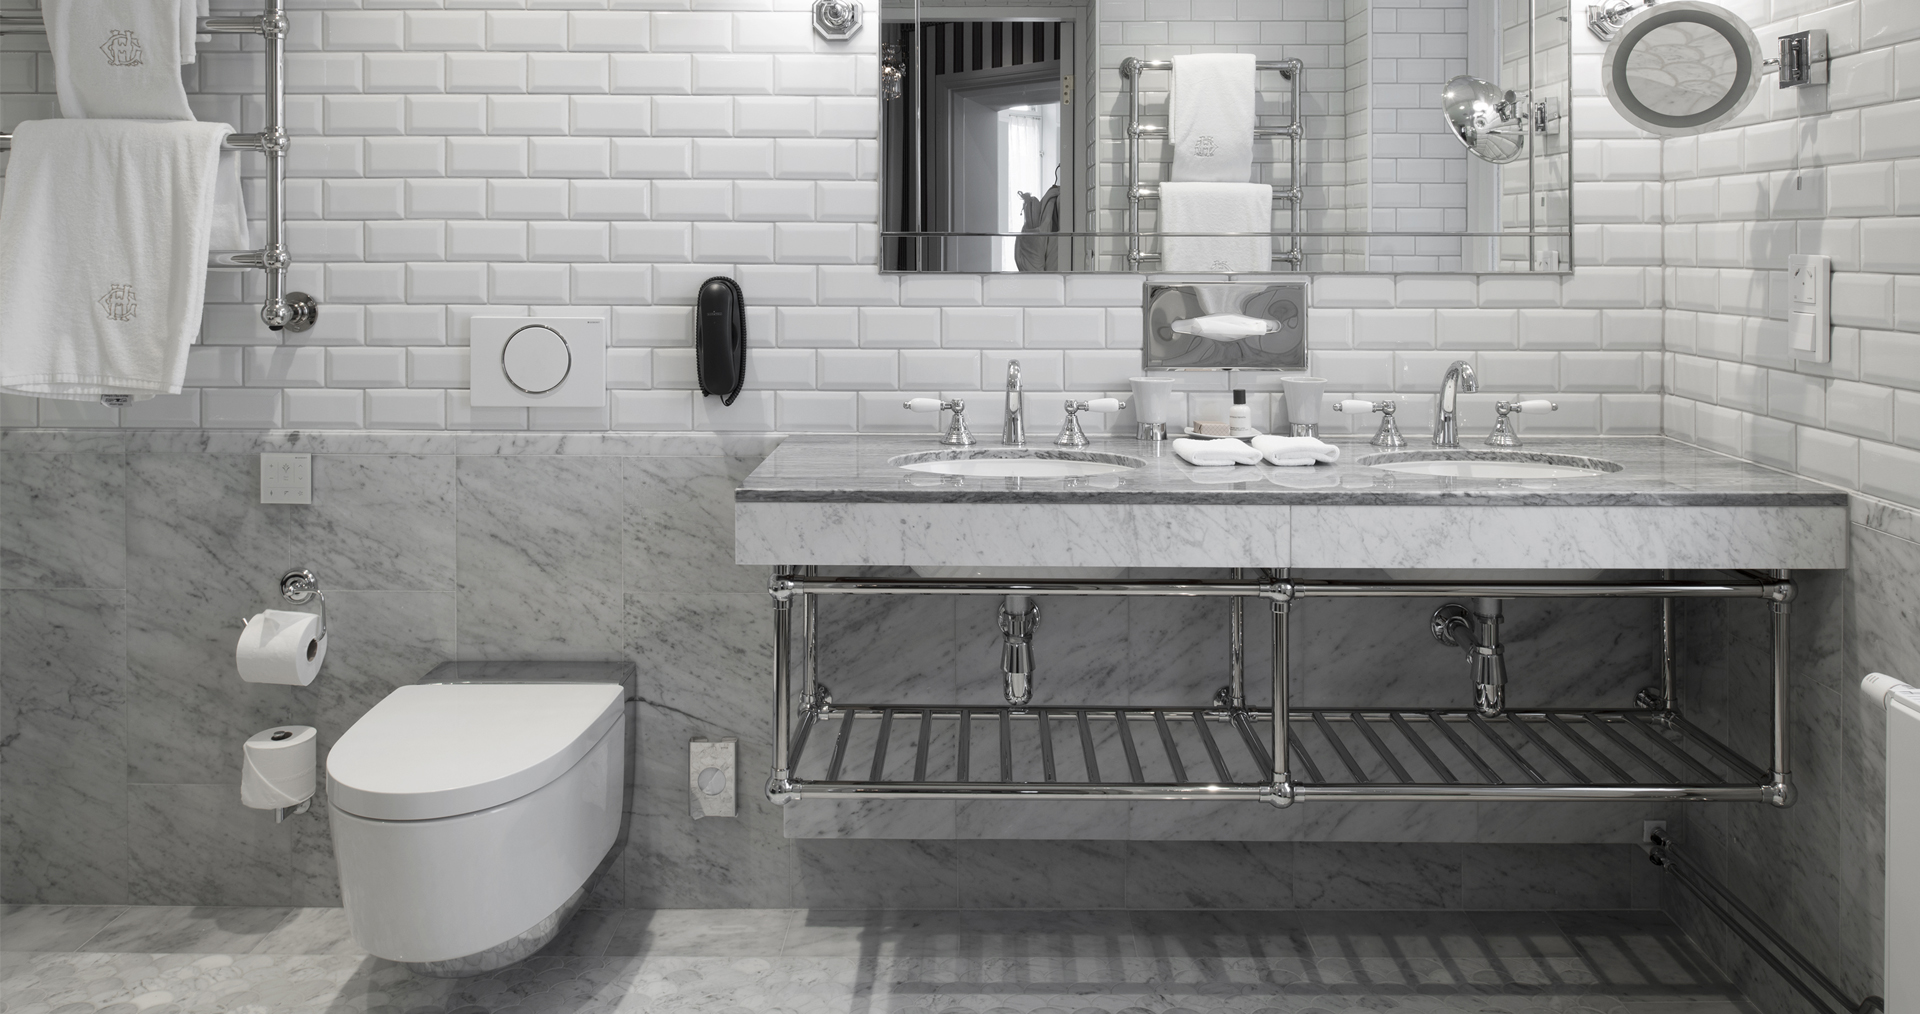 During its recent renovation, the renowned Grand Hôtel Stockholm installed Geberit AquaClean shower toilets.